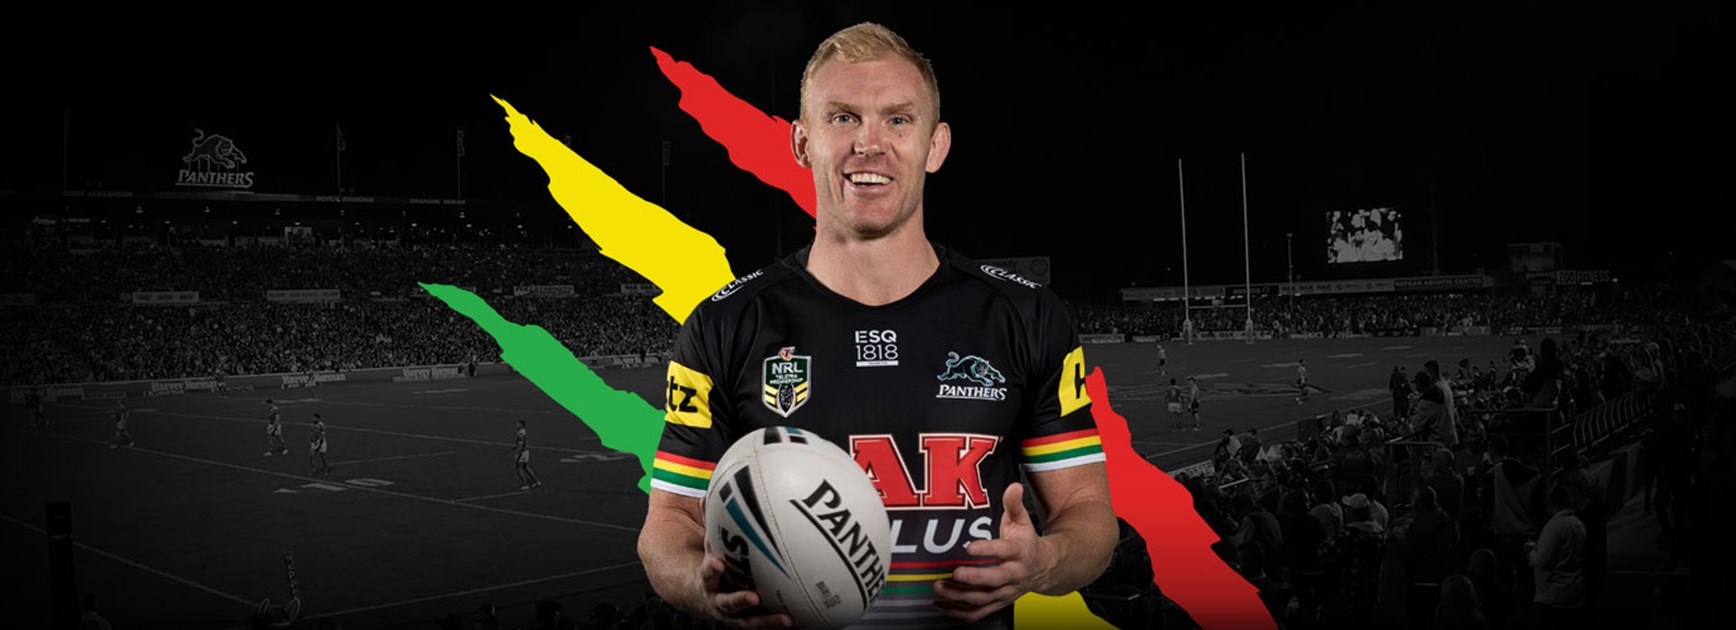 Panthers name Wallace as 2018 captain